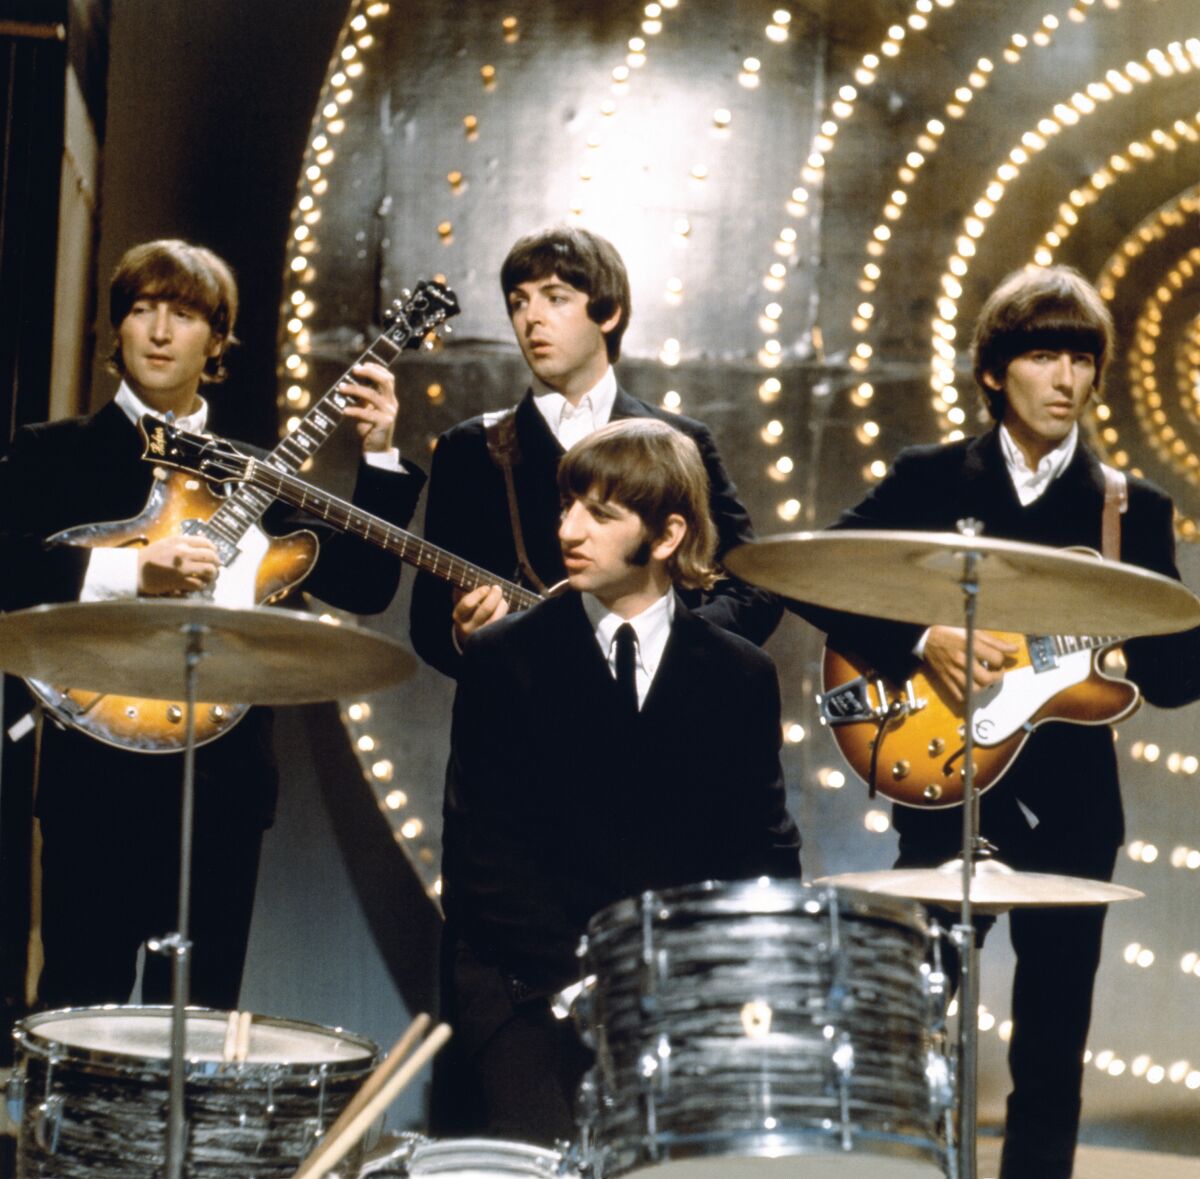 A four-piece rock band in the 1960s